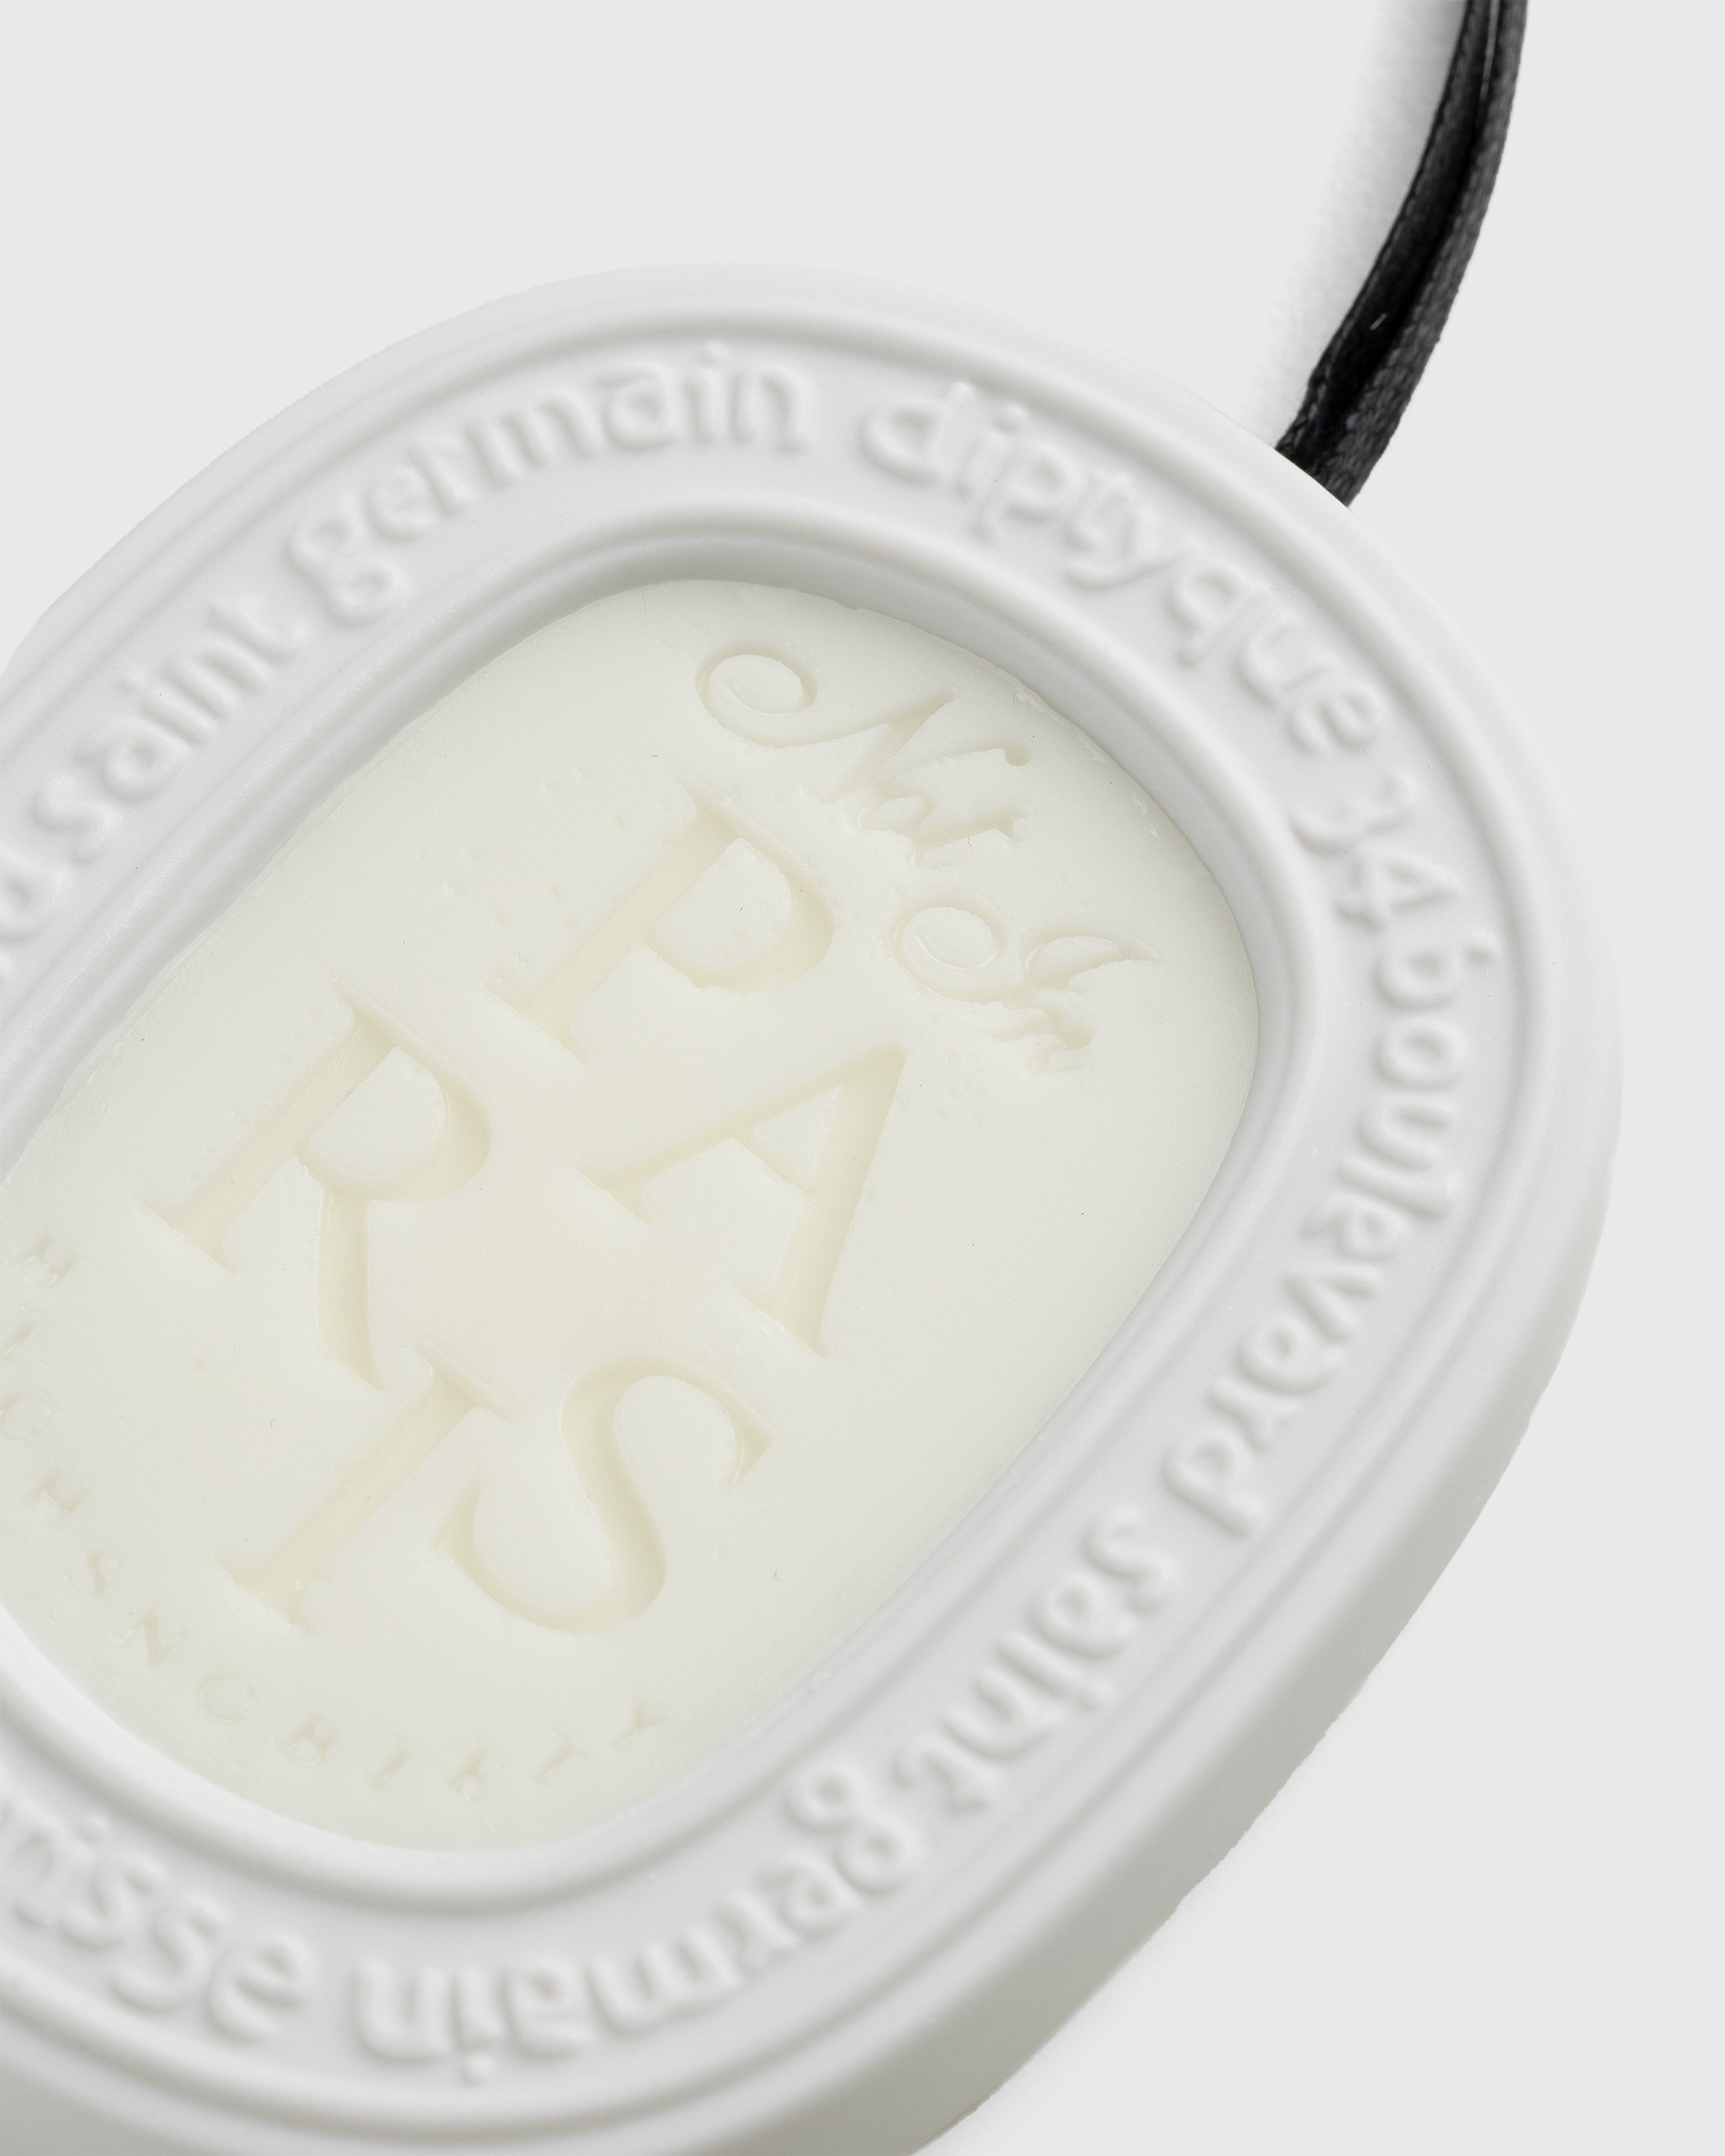 Diptyque x Highsnobiety - Not In Paris 4 Scented Oval White - Lifestyle - White - Image 4